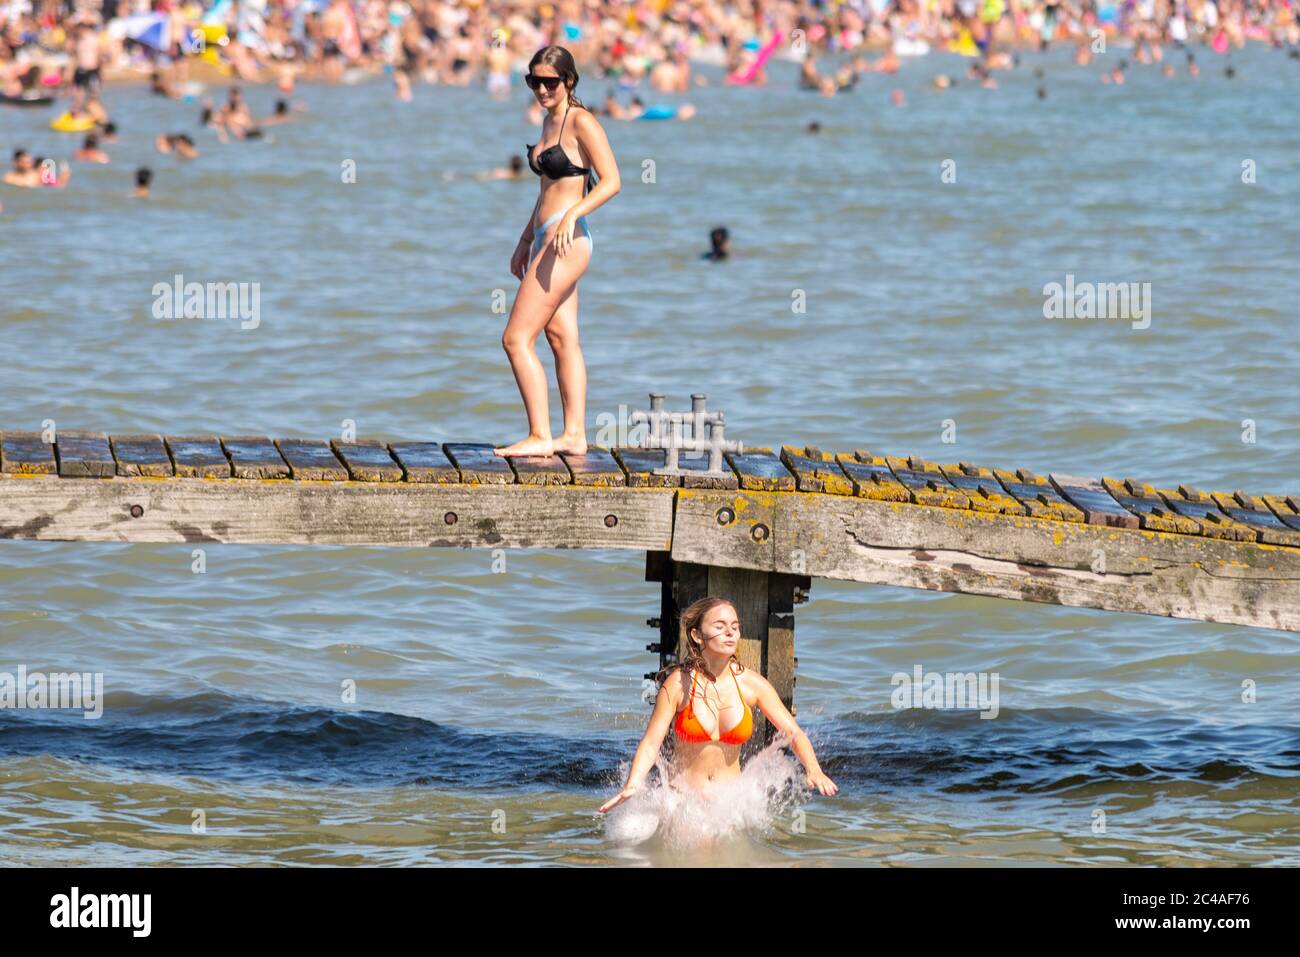 Southend on Sea, Essex, UK. 25th Jun, 2020. With the forecast record temperatures for 2020 people are heading to the seafront to cool down, despite the COVID-19 Coronavirus advice. In Southend on Sea the shore of the Thames Estuary is packed, with people swimming and jumping into the sea. Young white Caucasian female landing in the sea Stock Photo